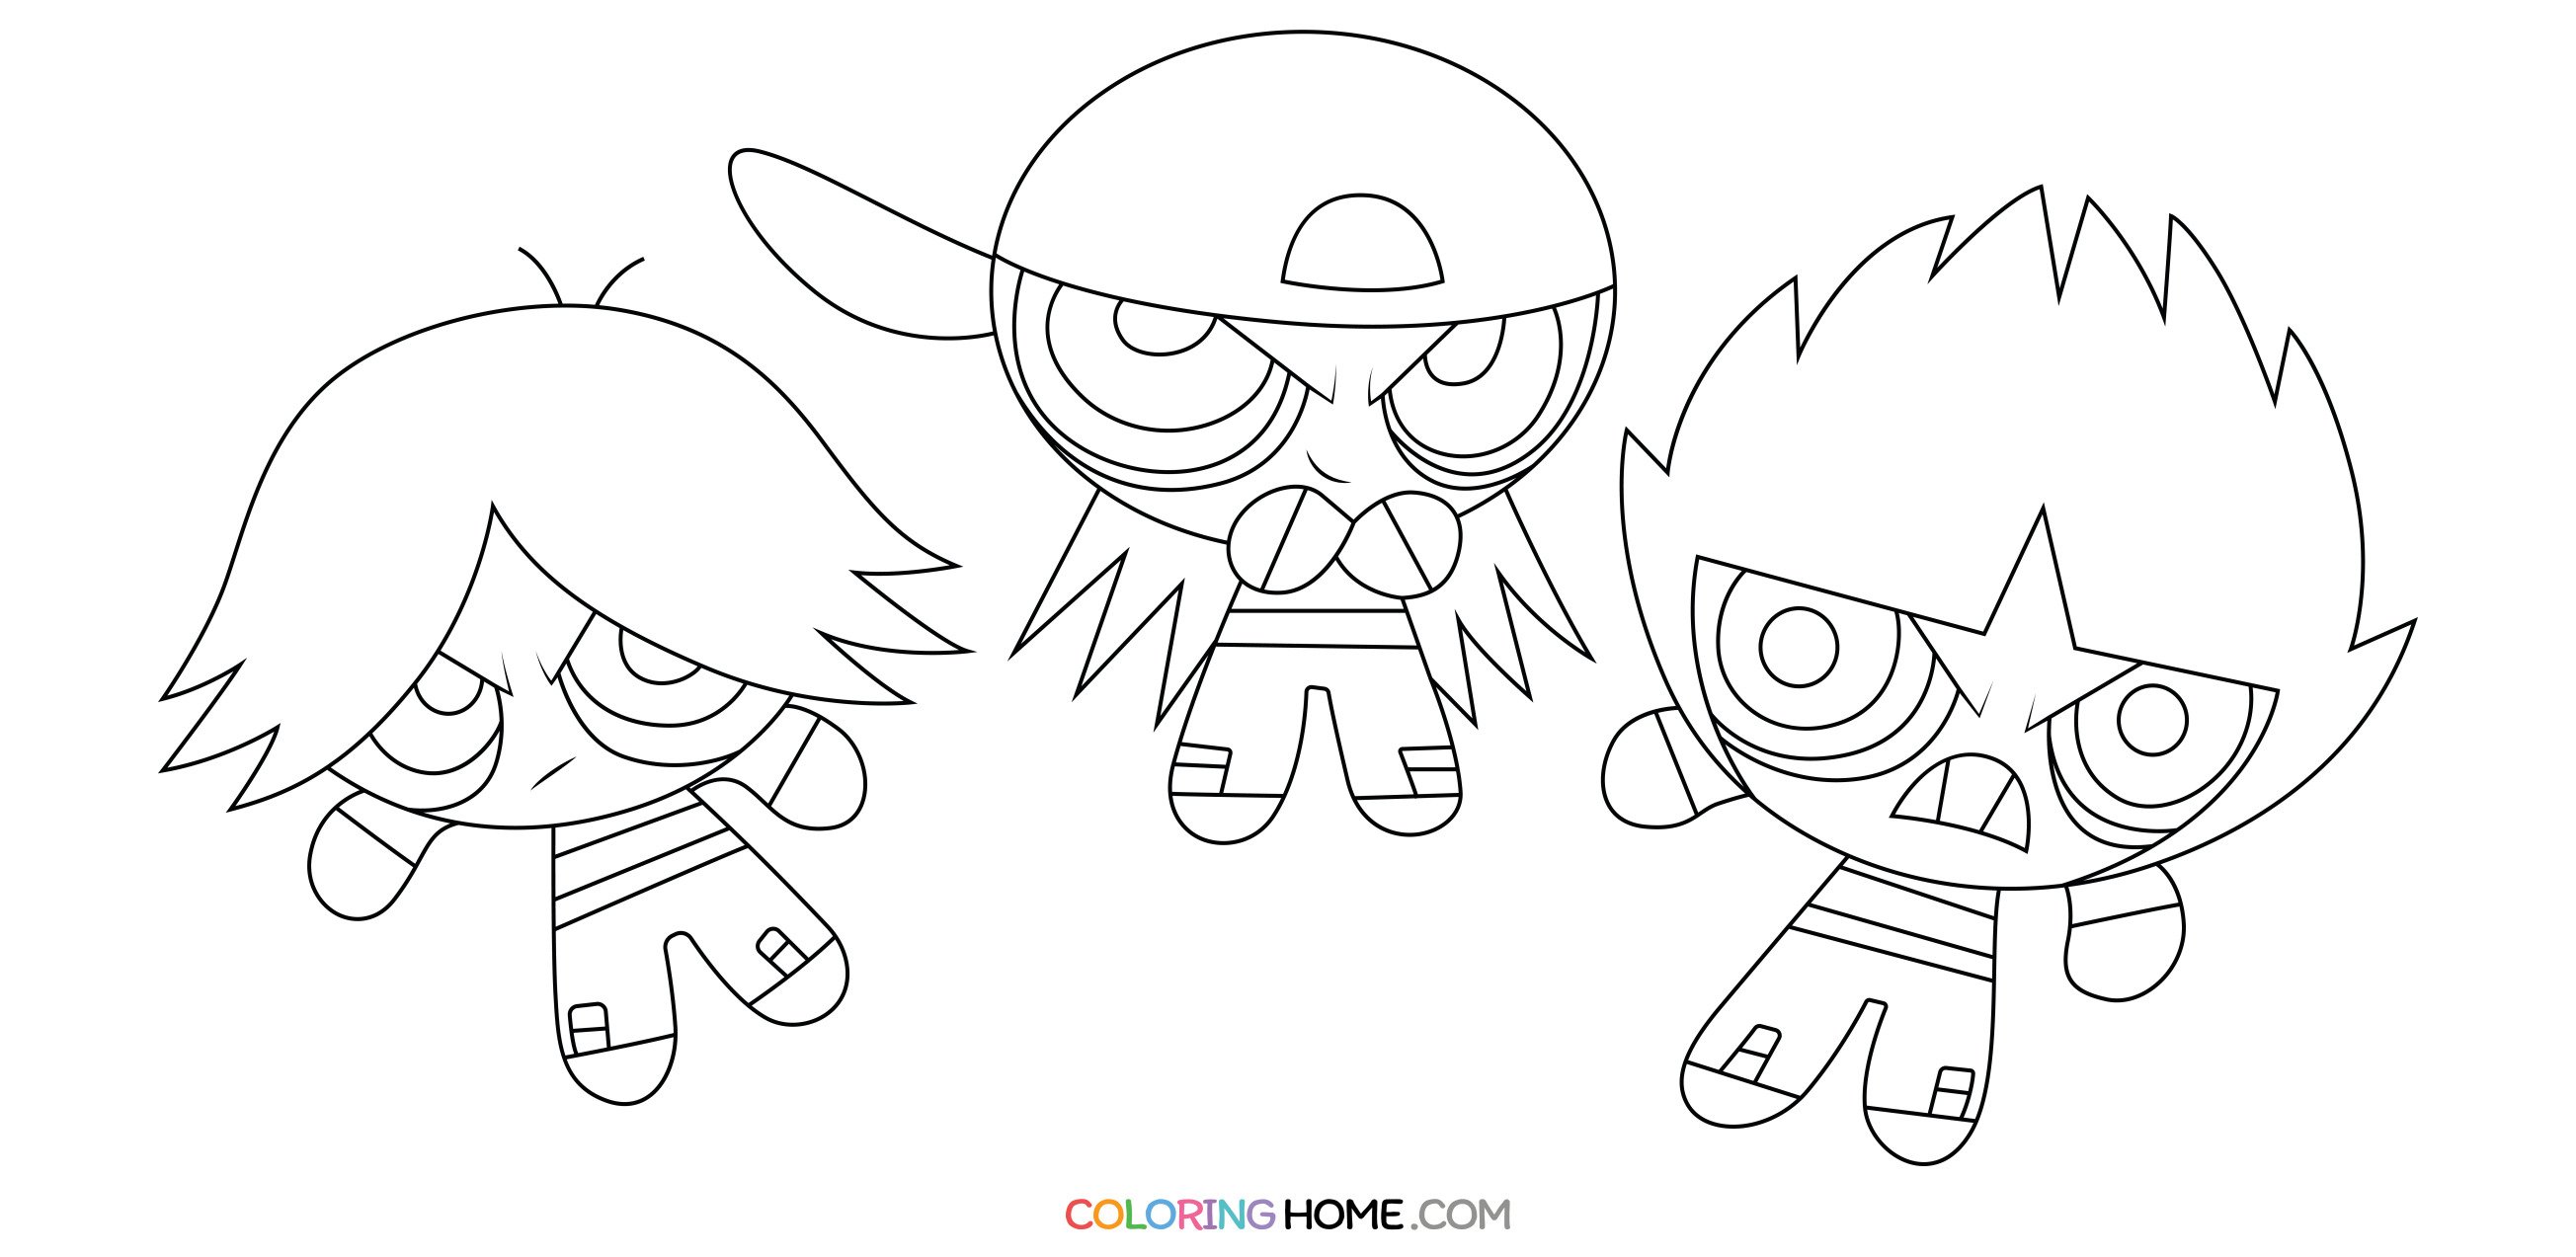 The Rowdyruff Boys coloring page